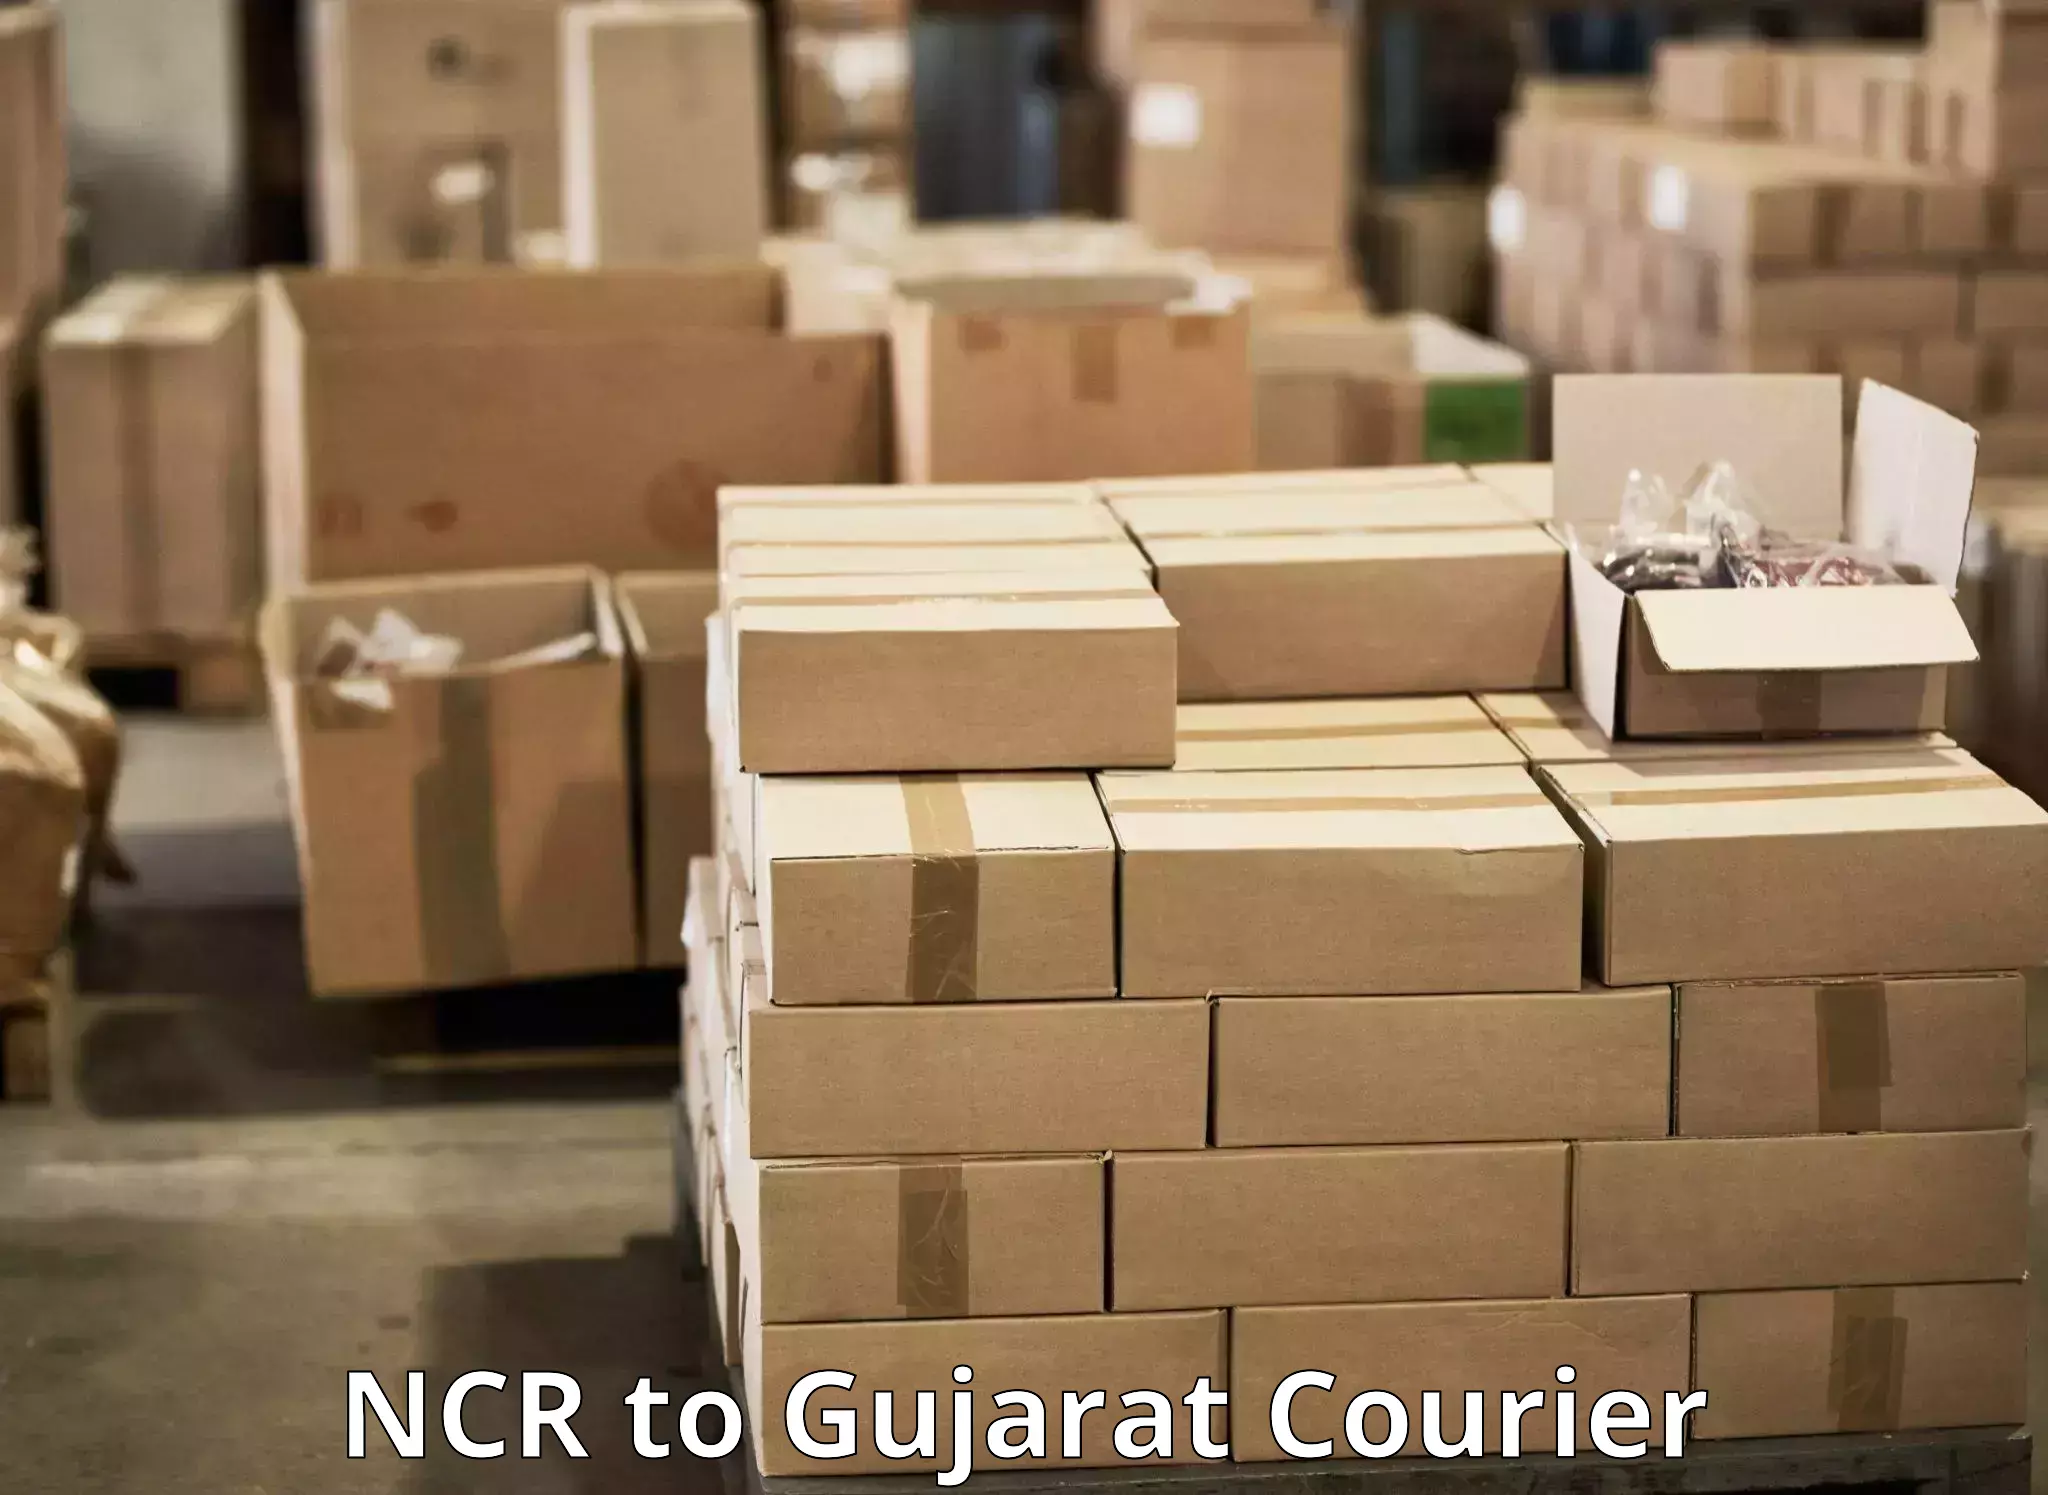 Fast delivery service NCR to Gujarat